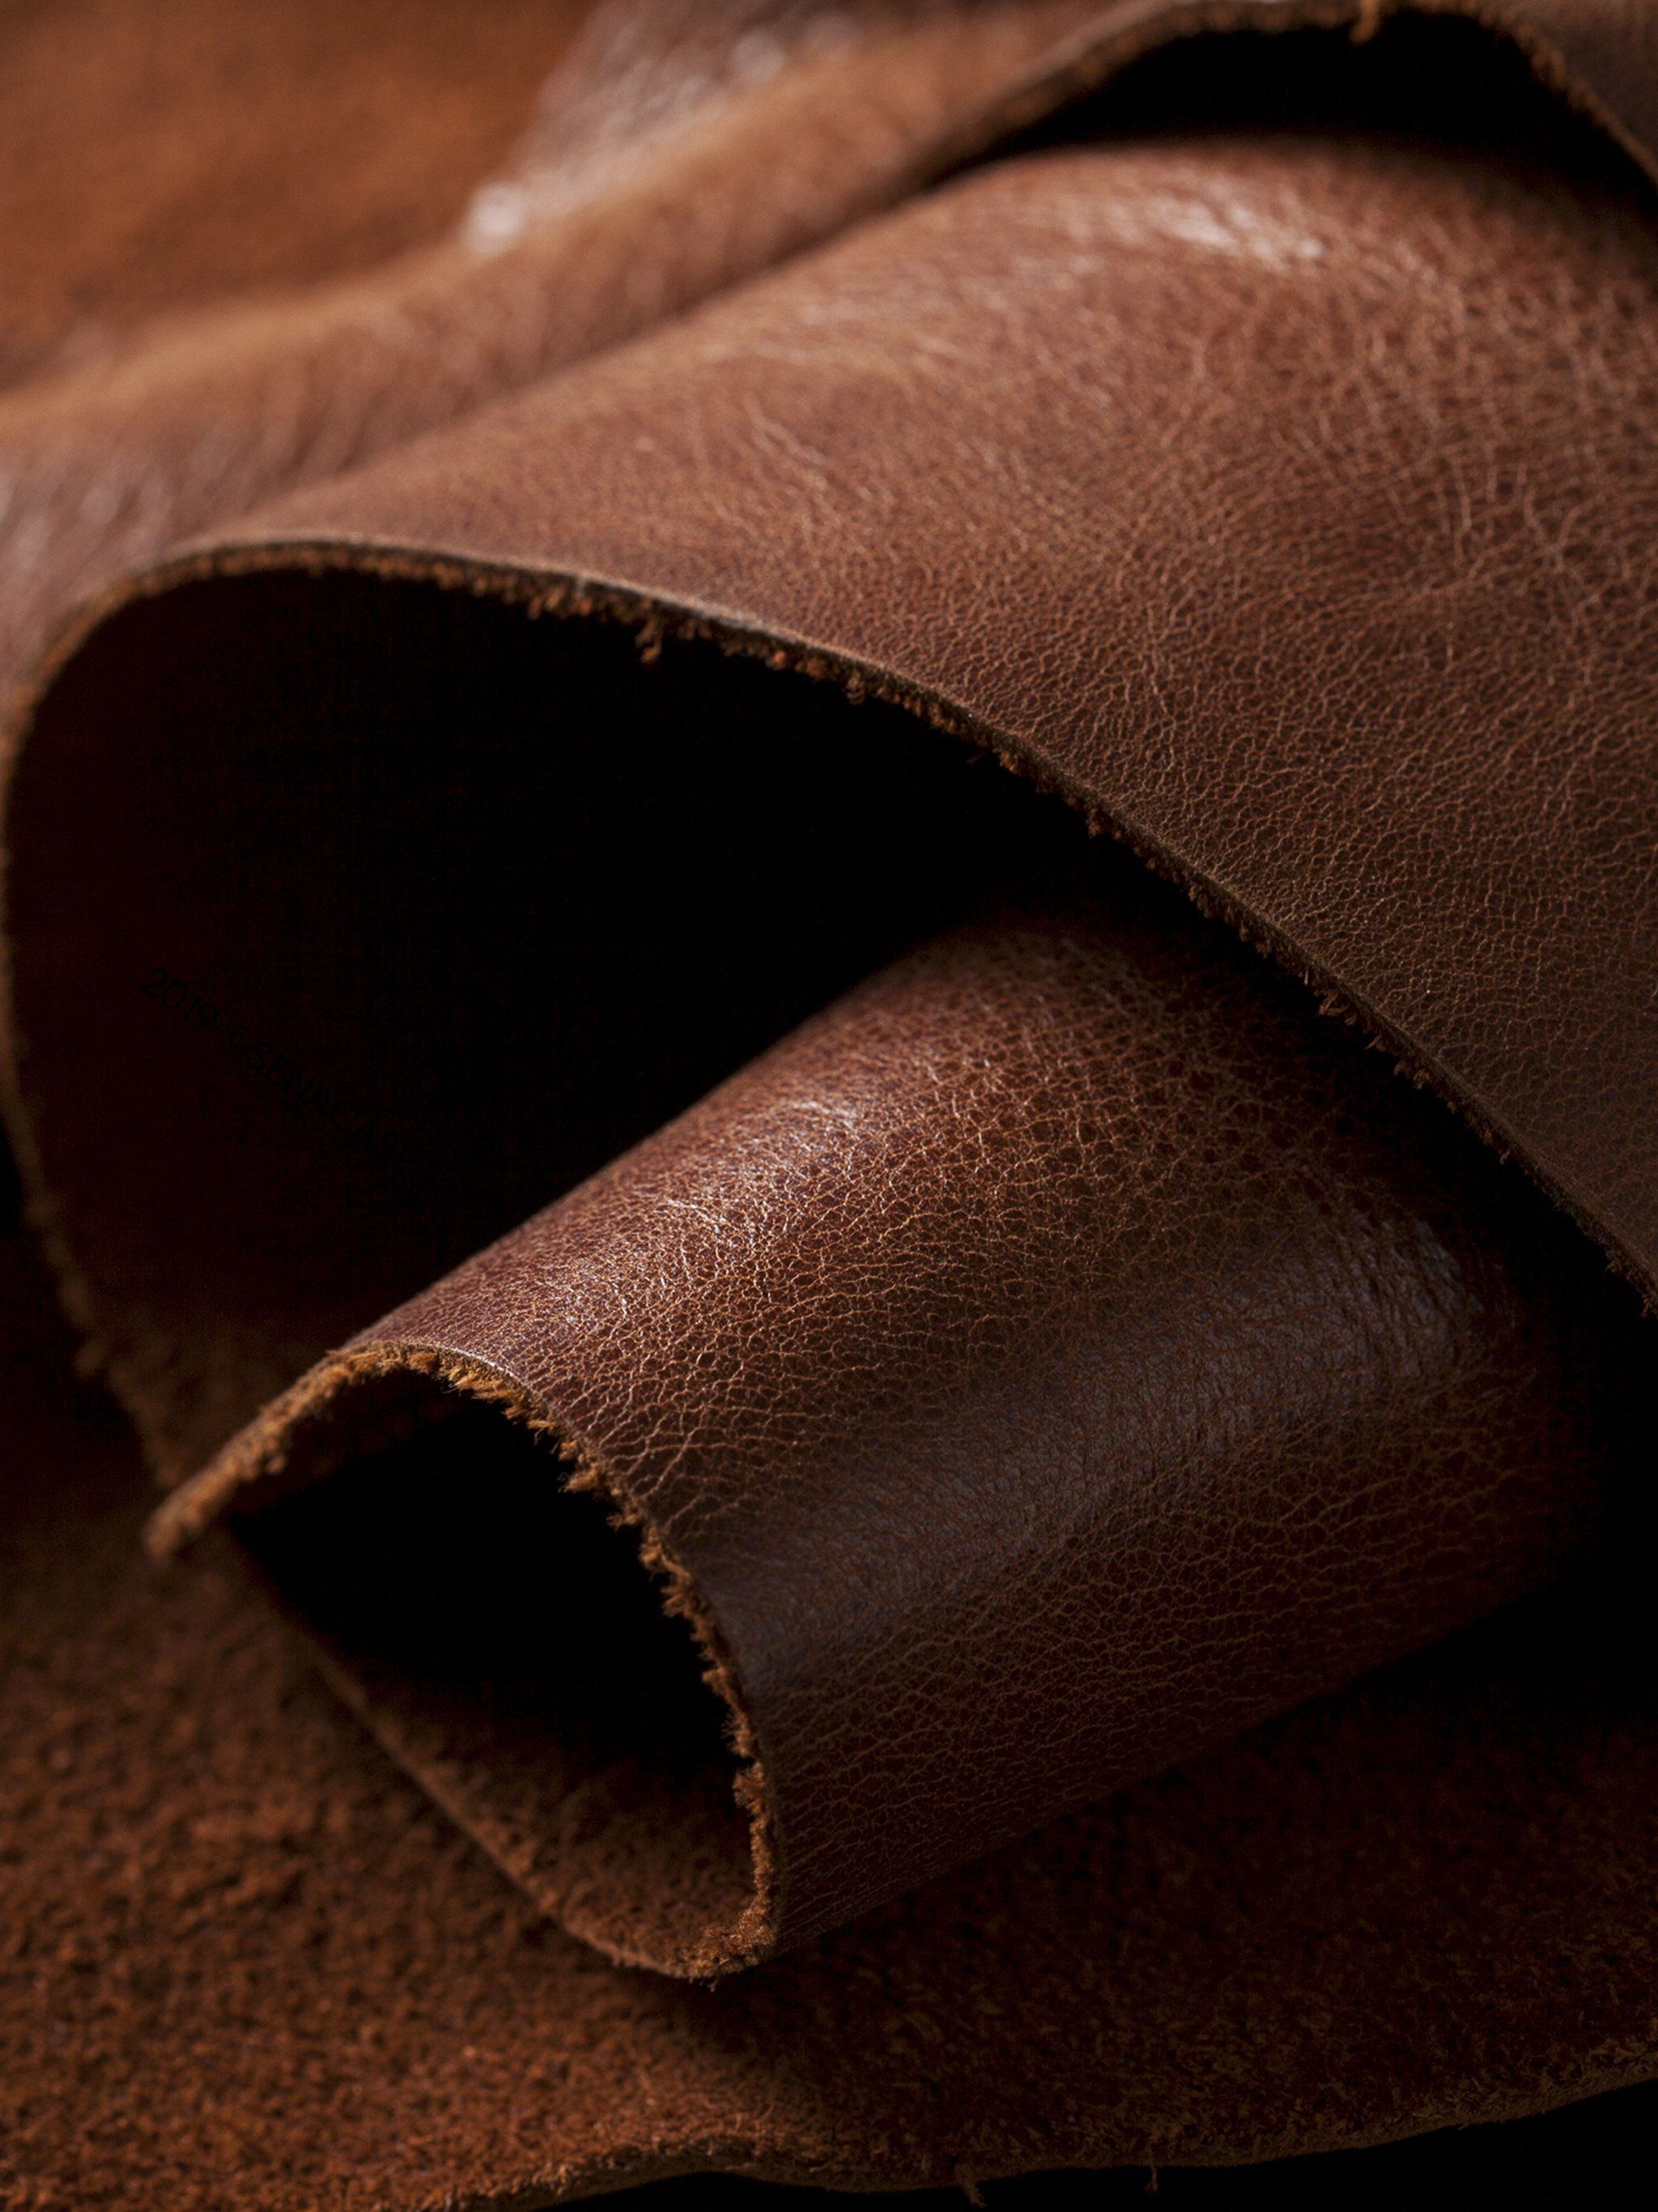 Brown Leather Wallpaper Free Brown Leather Background